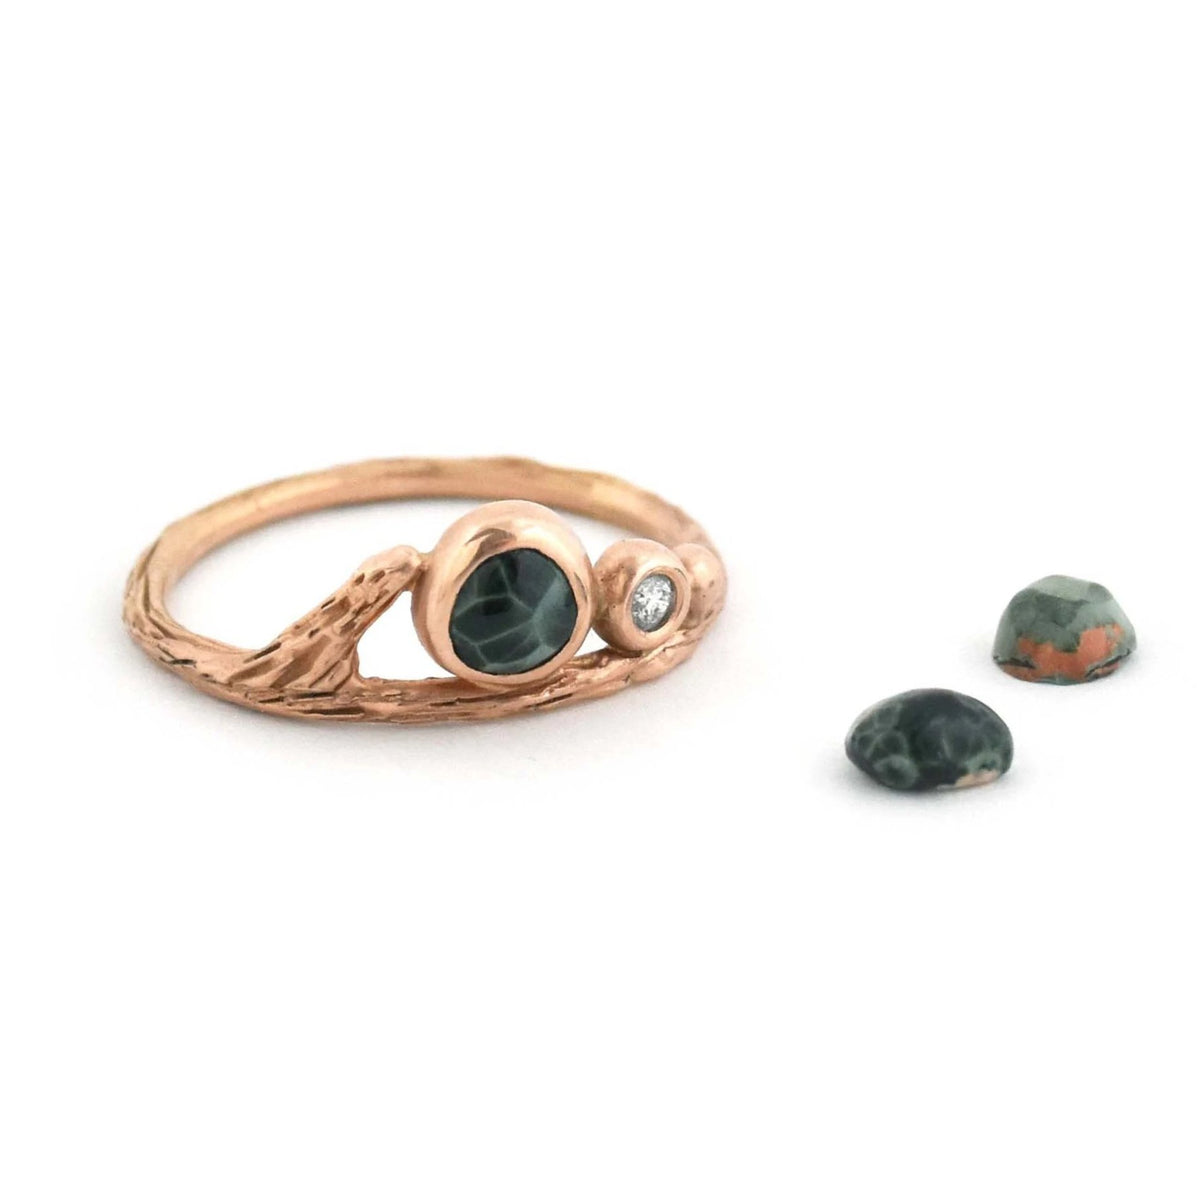 Gold Delicate Dewdrop Ring - your choice of stone and gold - Wedding Ring 14K Rose Gold / A 14K Rose Gold / B 3486 - handmade by Beth Millner Jewelry